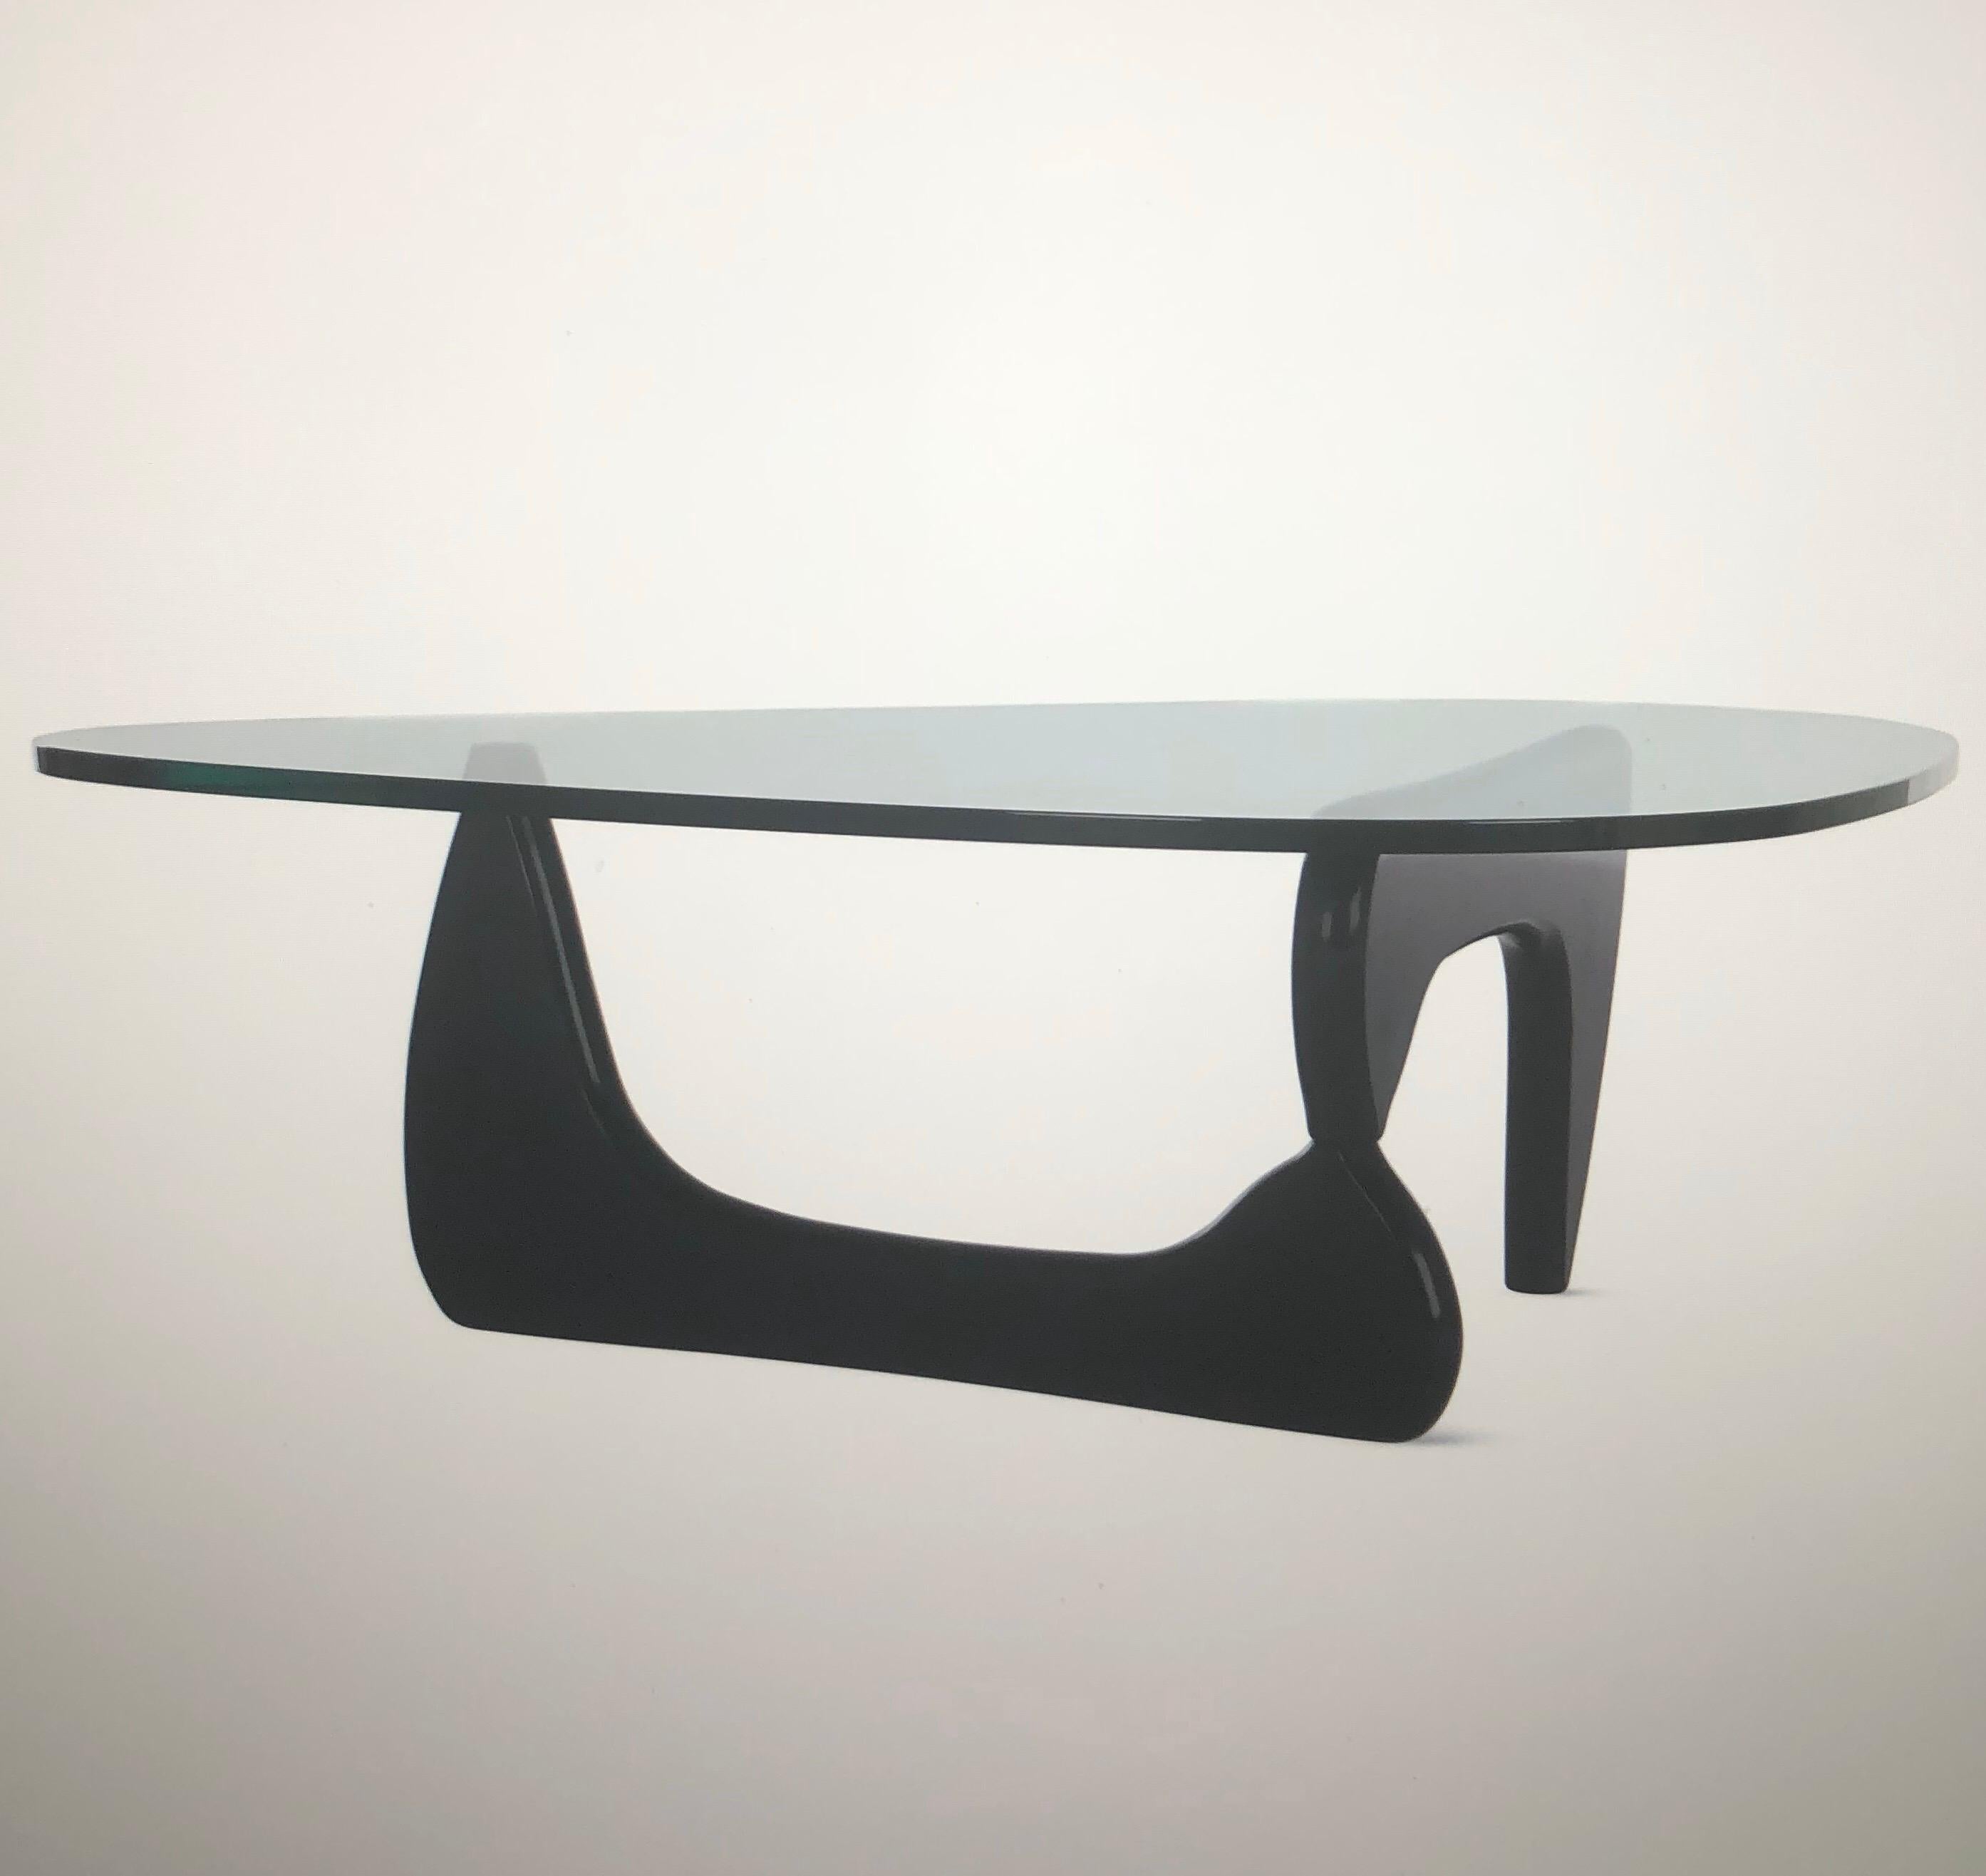 Glass top coffee table by Isamu Noguchi for Herman Miller, circa 2000s. 

This authentic table has Noguchi’s signature etched into the side of the glass with the manufacturer’s medallion present on the underside of the base. The table is made of a